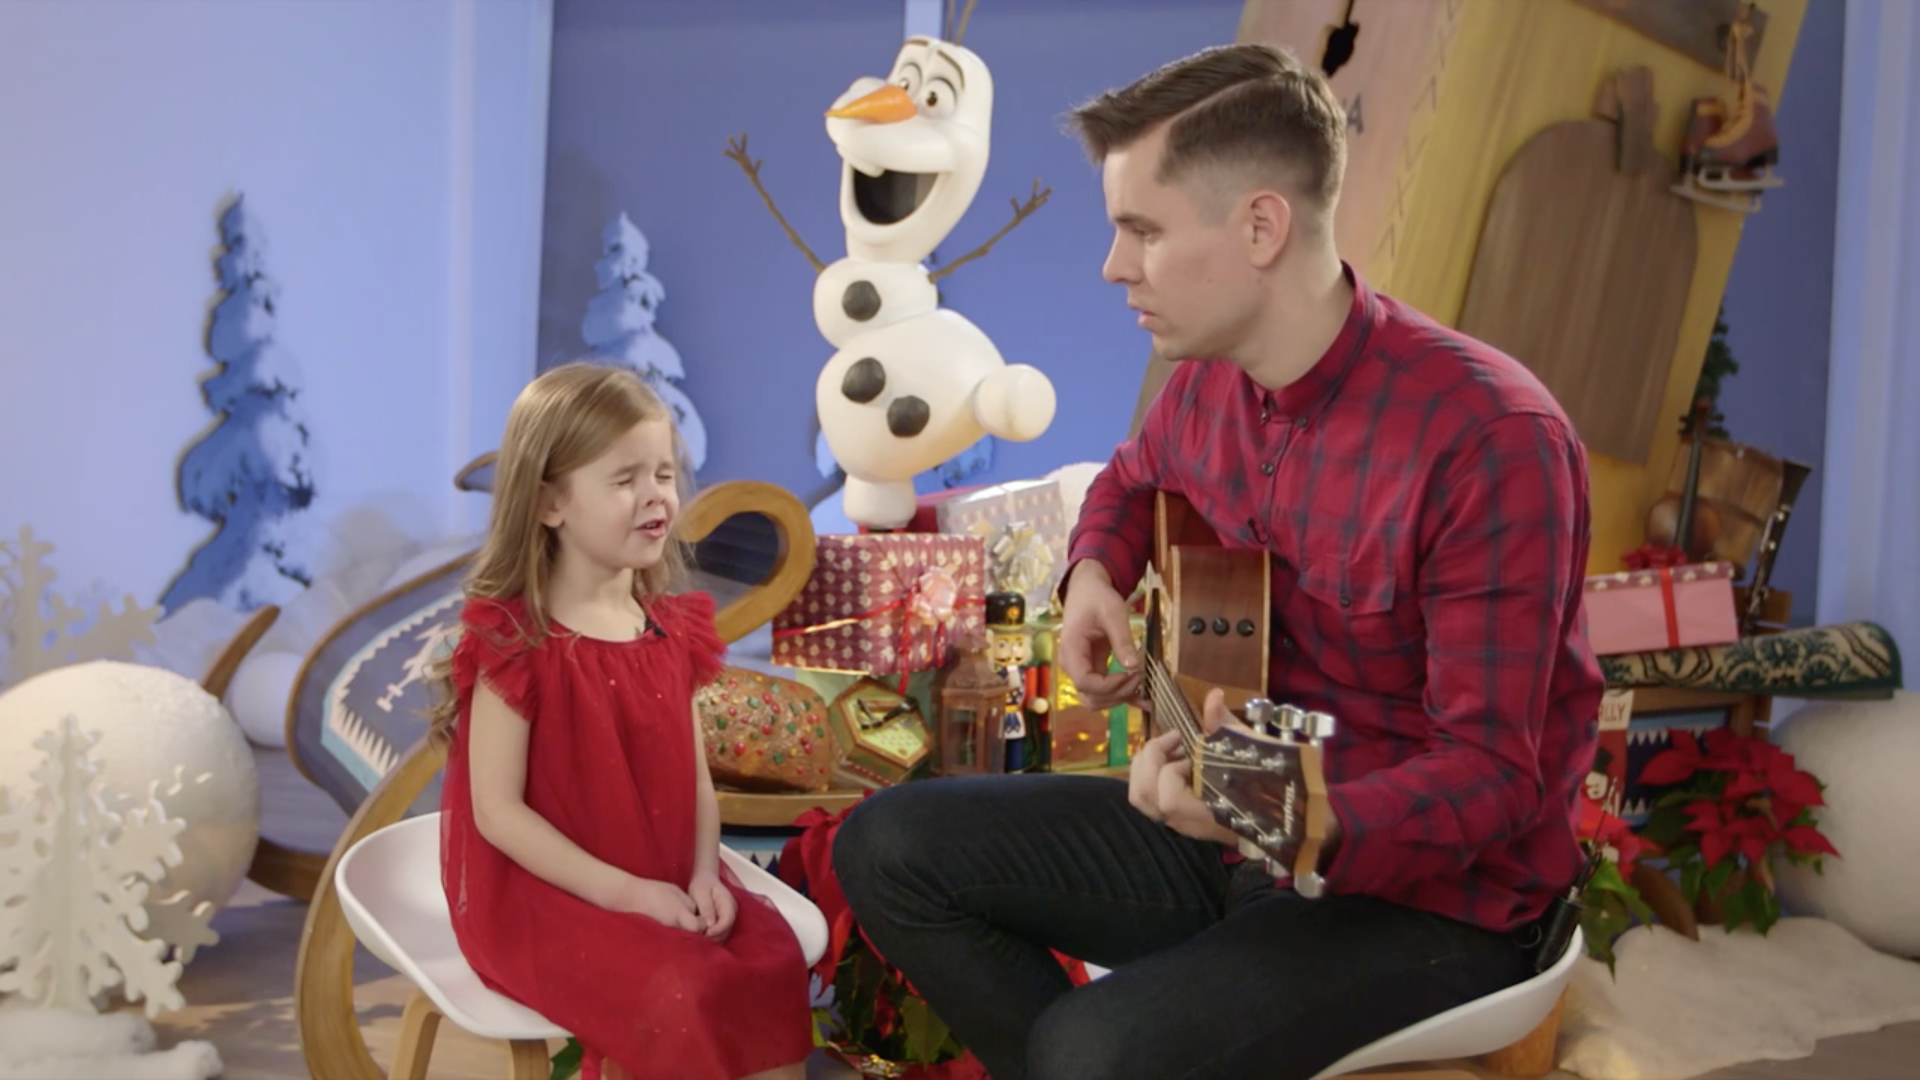 YouTube Famous Father-Daughter Duo Perform "When We’re Together" at Walt Disney Animation Studios